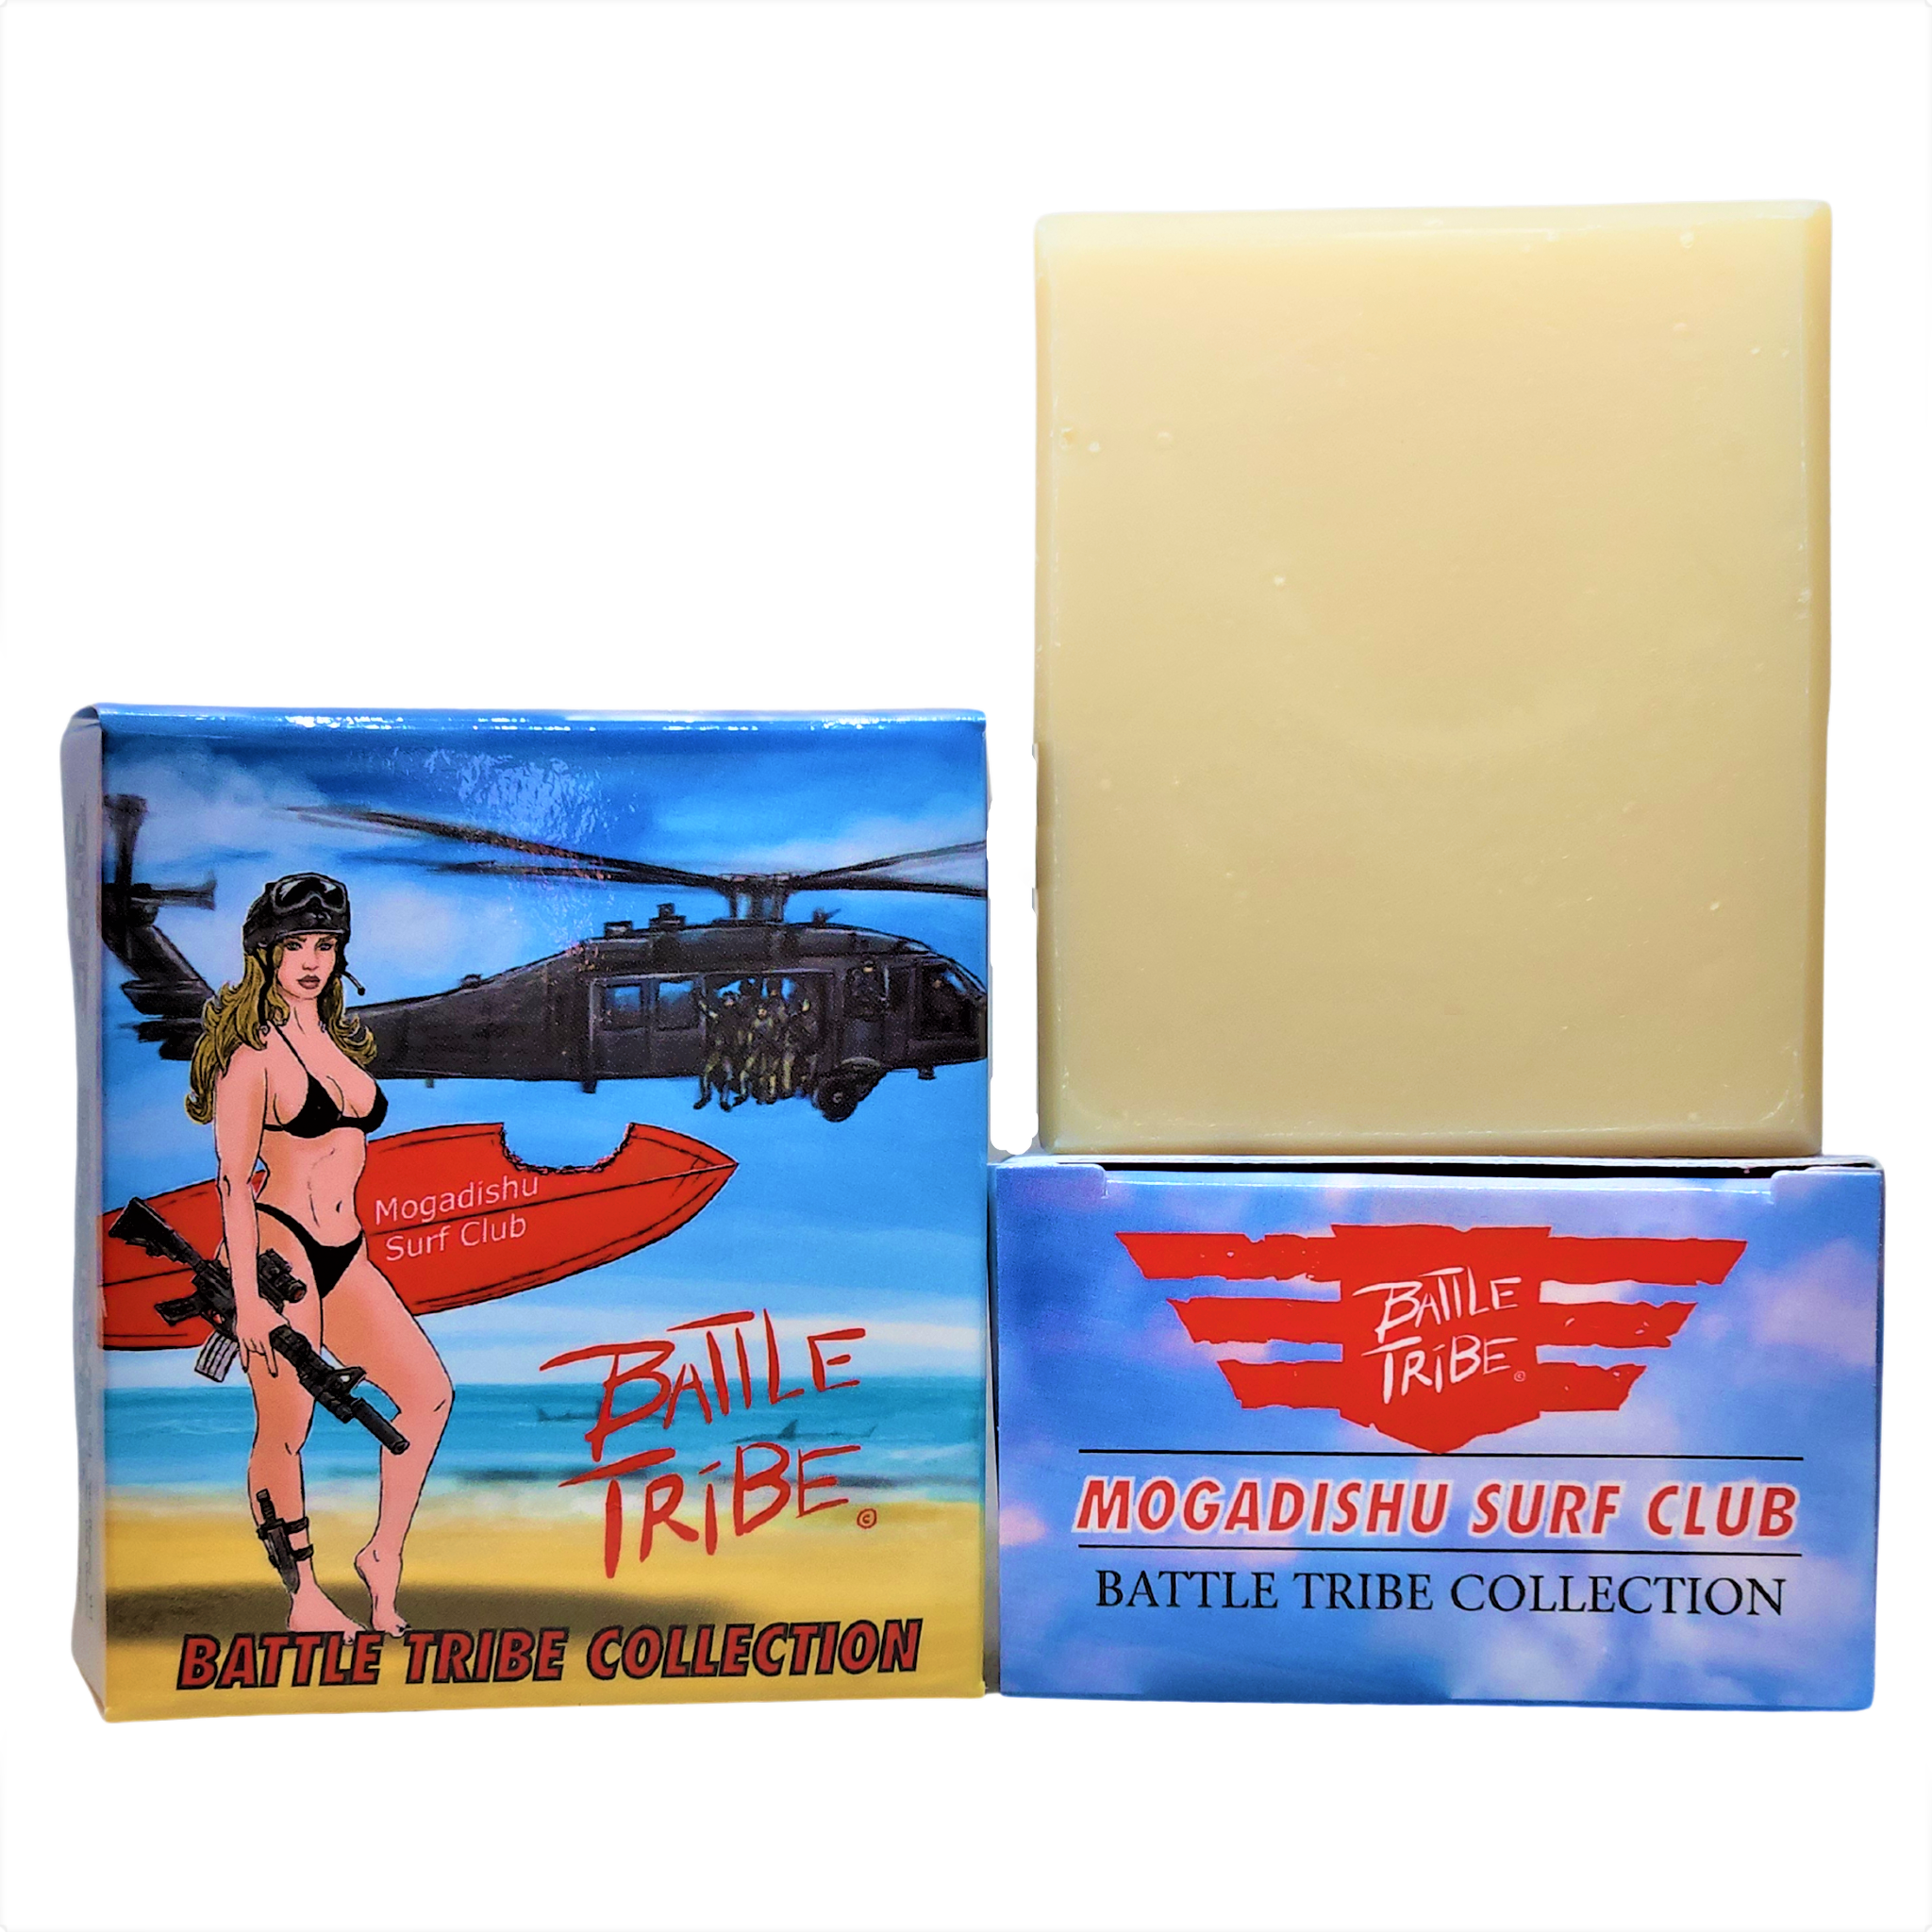 1776 Natural Cold Processed Men's Soap Our Version of Bay Rum